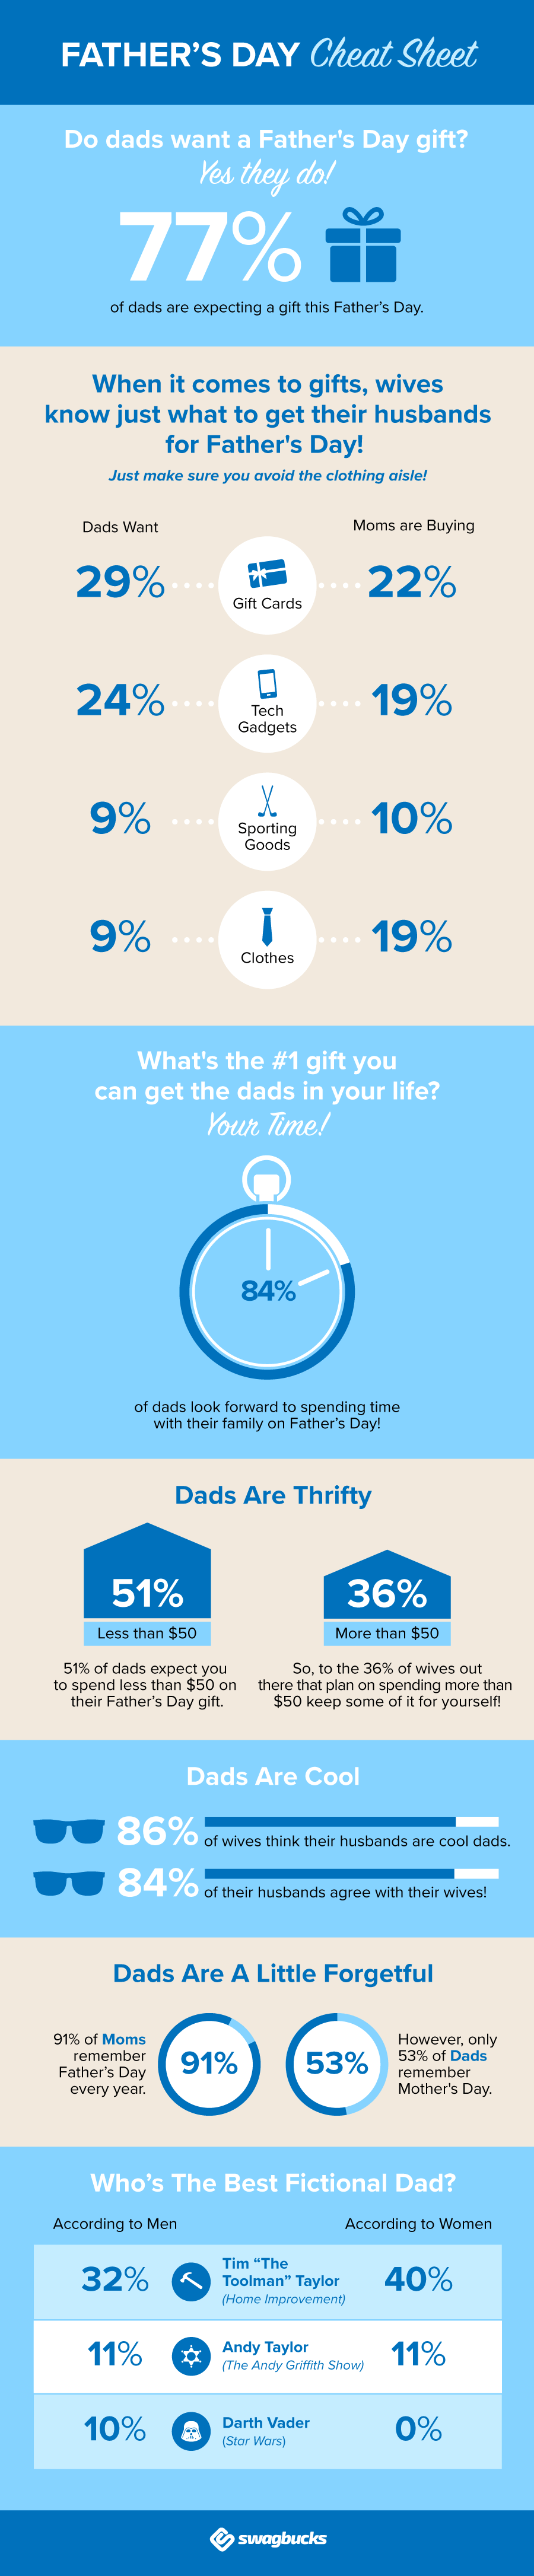 Swagbucks Fathers Day Infographic